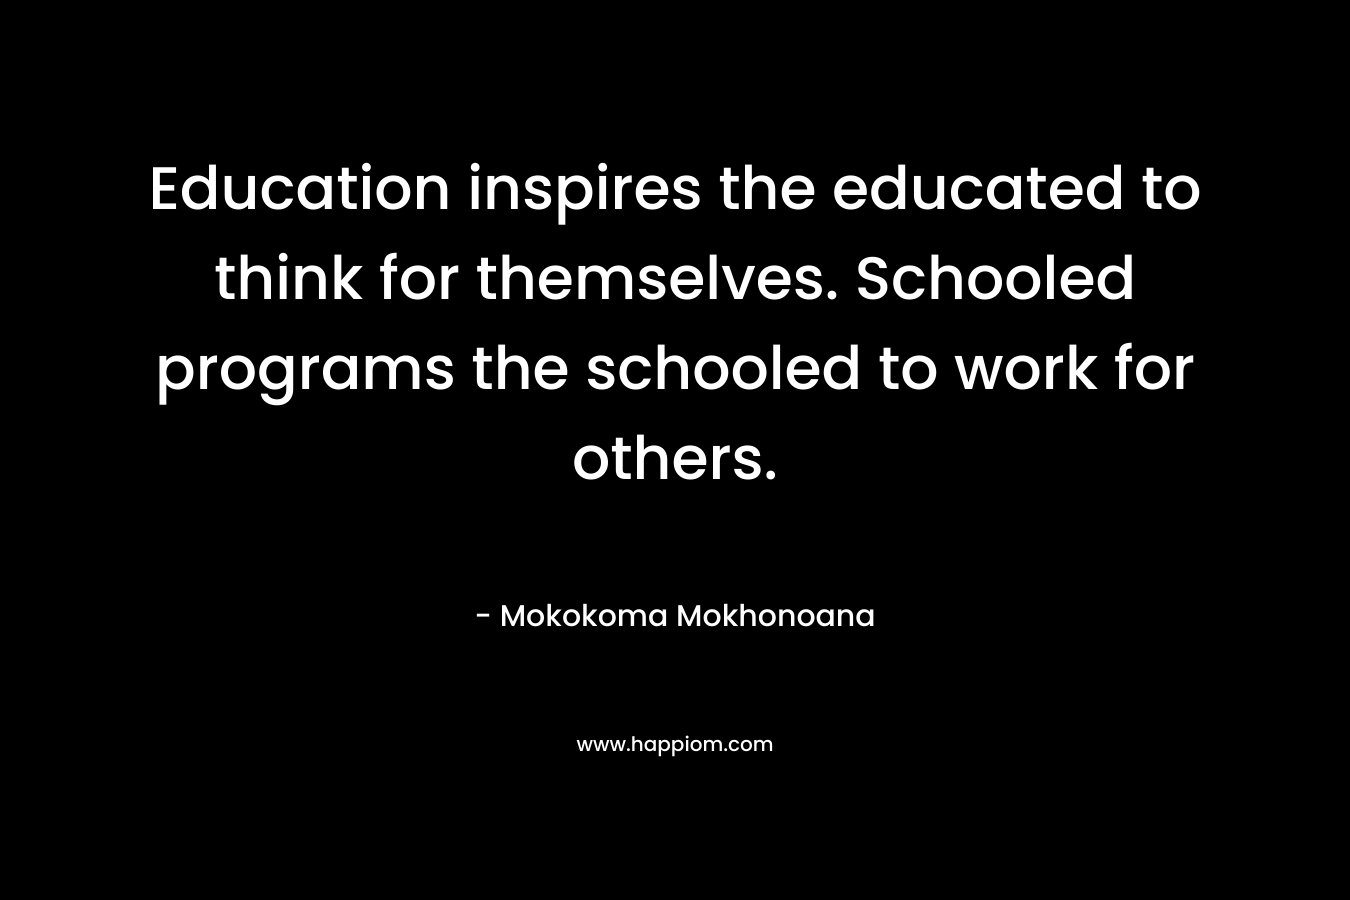 Education inspires the educated to think for themselves. Schooled programs the schooled to work for others. – Mokokoma Mokhonoana